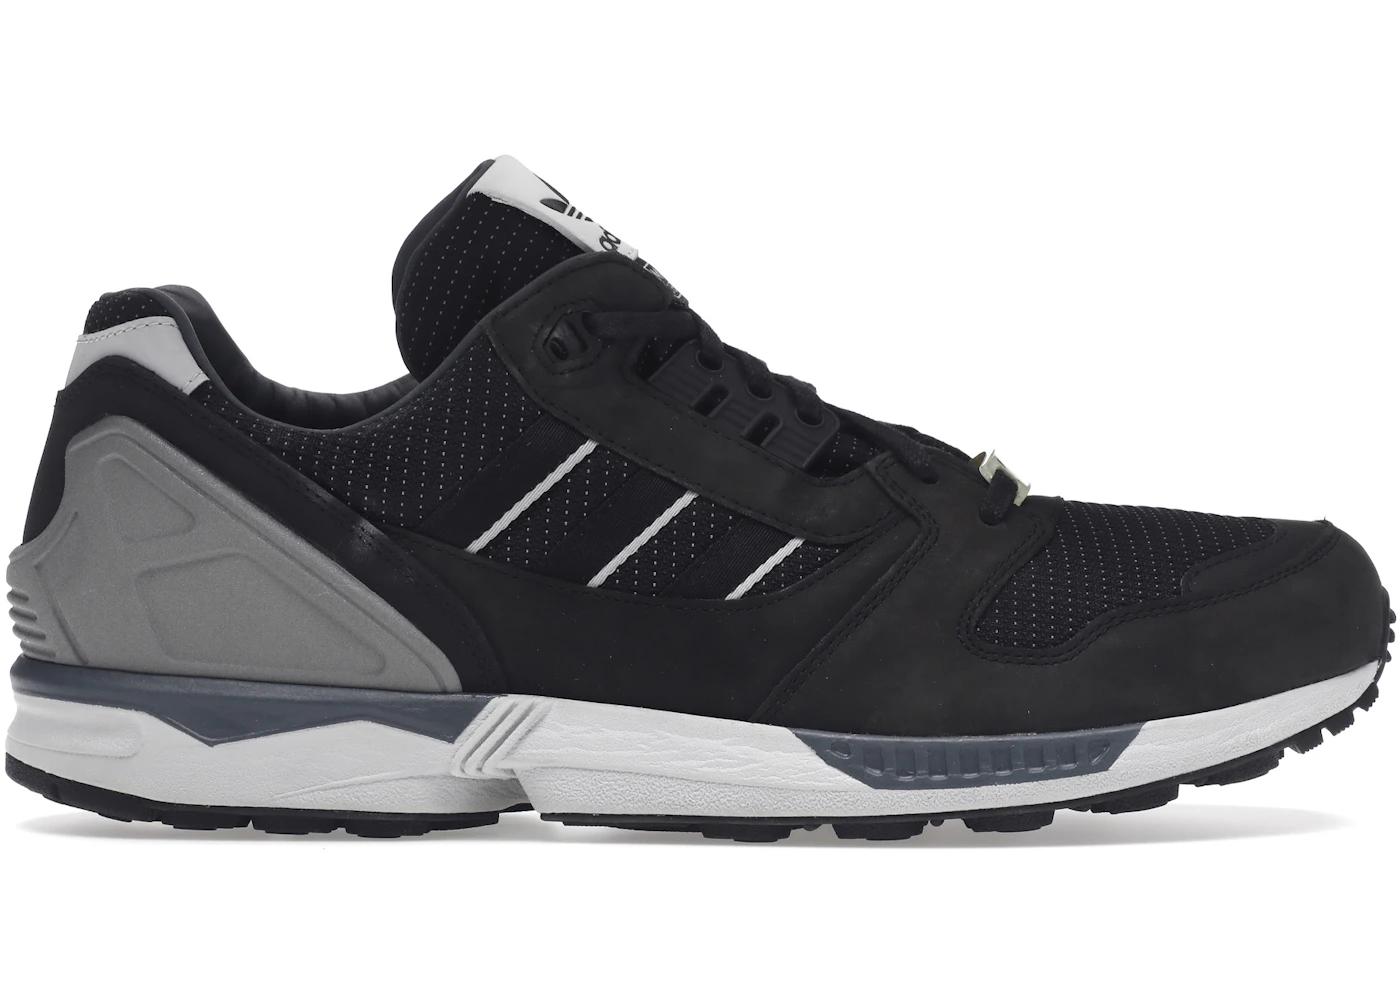 adidas ZX 8000 Alpha Fall of the Wall Men's - M18628 - US